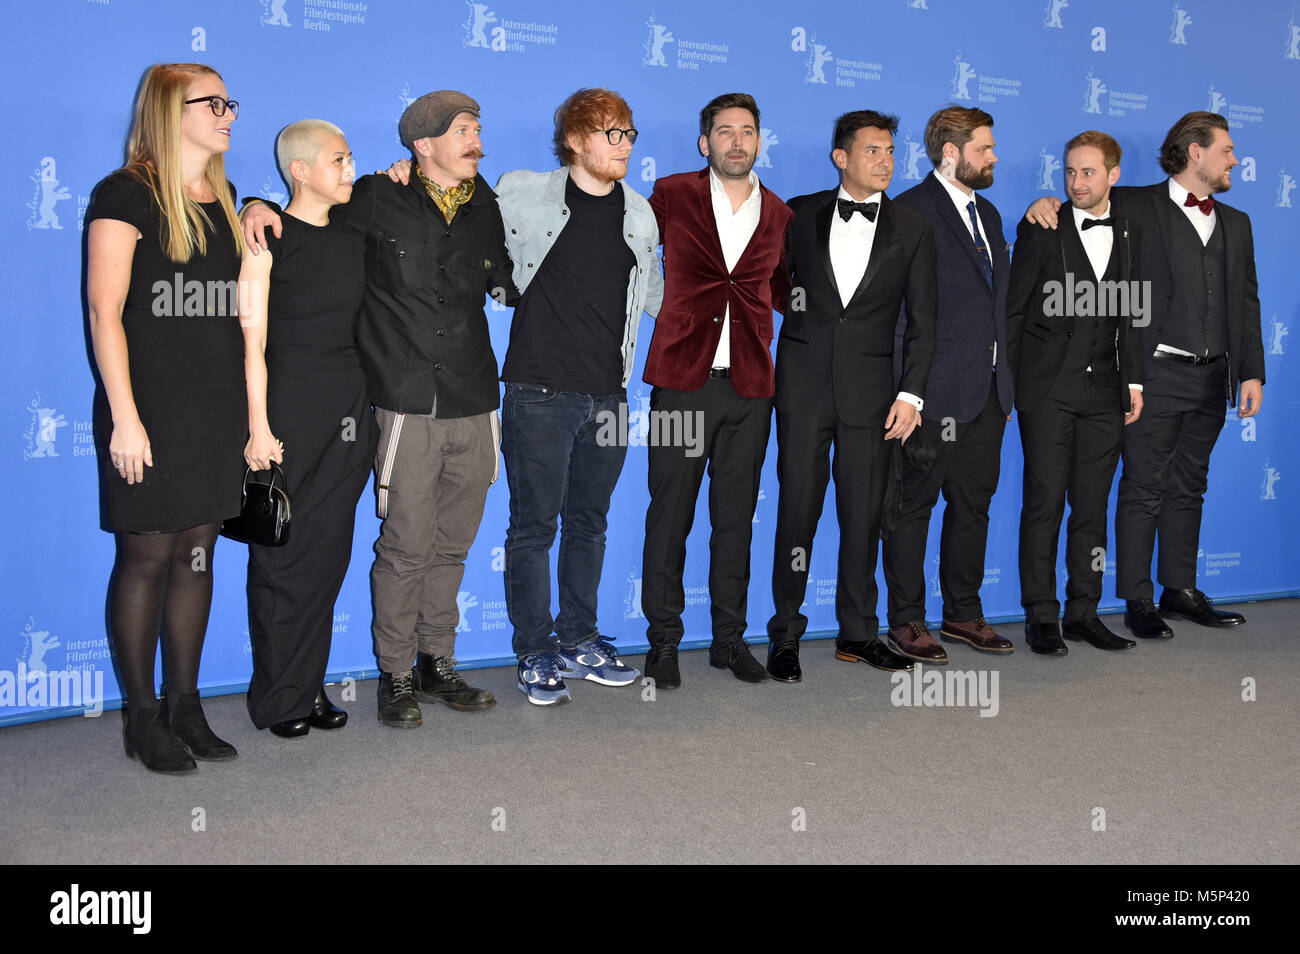 Berlin, Germany. 23rd Feb, 2018. Maleri Sevier, Kimmie Kim, Foy Vance, Ed Sheeran, Murray Cummings, Alejandro Reyes-Knight, Ben Wainwright-Pearce, Billy Cummings and William Bean during the 'Songwriter' photocall at the 68th Berlin International Film Festival/Berlinale 2018 on February 23, 2018 in Berlin, Germany. | usage worldwide Credit: dpa/Alamy Live News Stock Photo